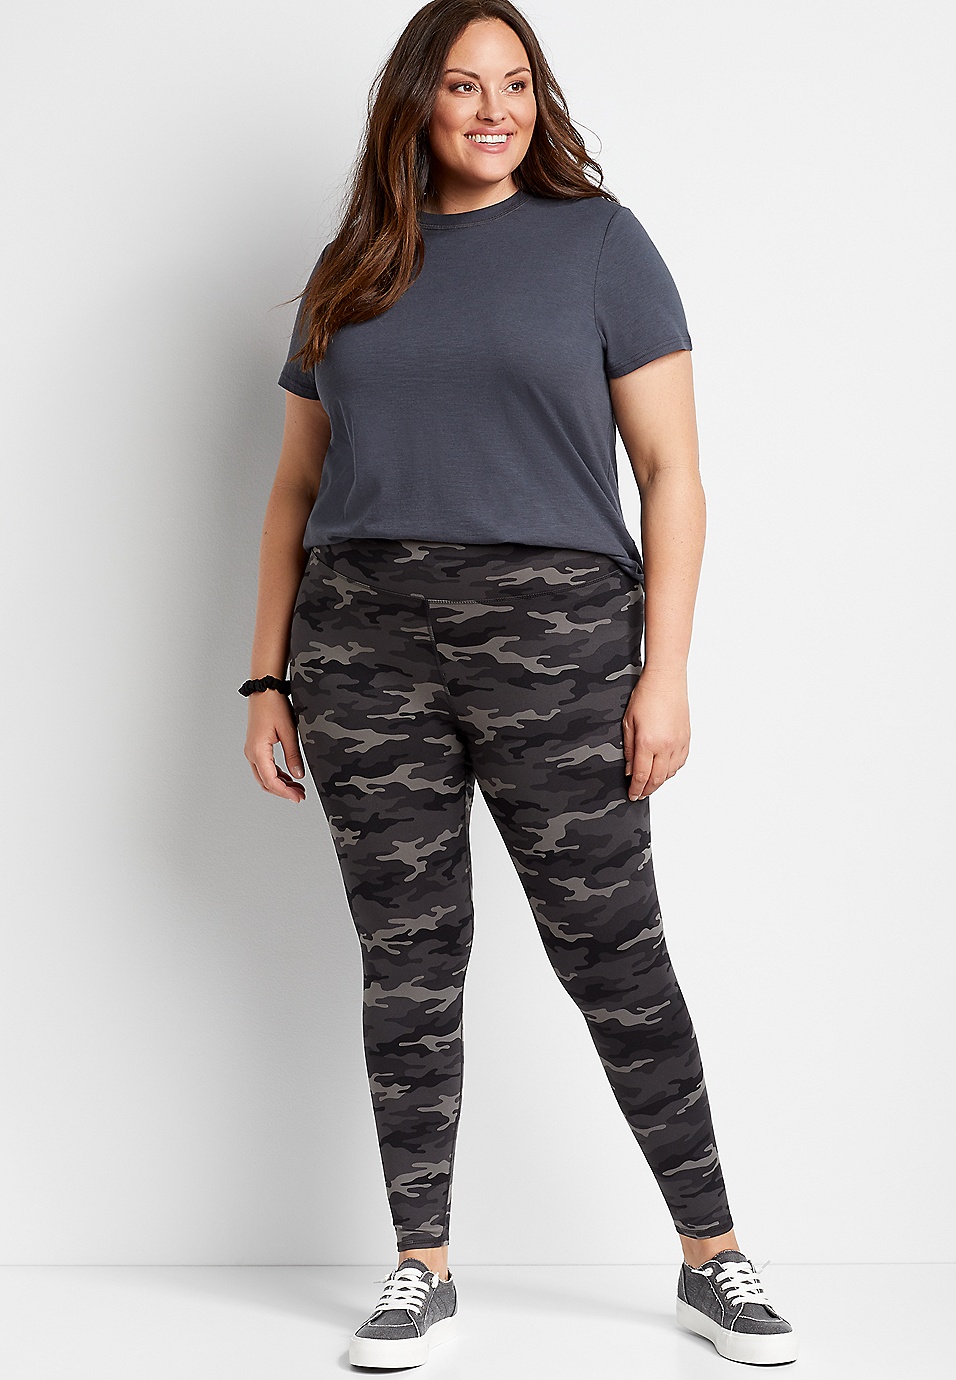 camo leggings Black Size M - $20 (33% Off Retail) New With Tags - From julz